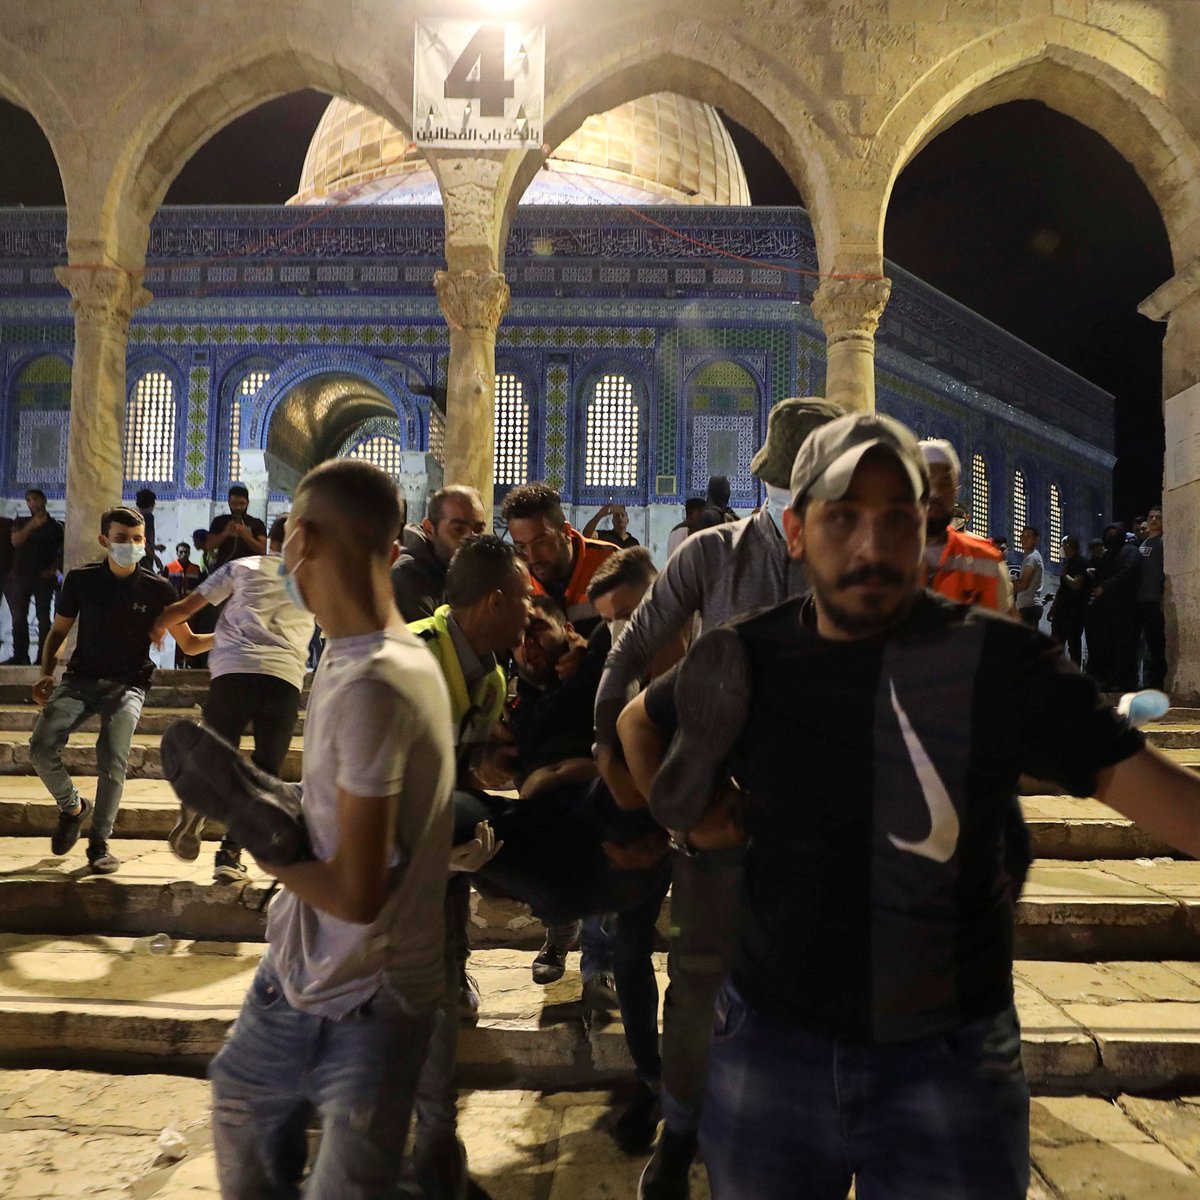 200+ Palestinians were wounded on Friday night when Israeli police fired rubber bullets at the Al-Aqsa mosque in occupied East Jerusalem. At least 1 lost an eye."They are throwing bombs at the Muslim worshippers."Palestinians are protesting planned evictions of 30+ families.